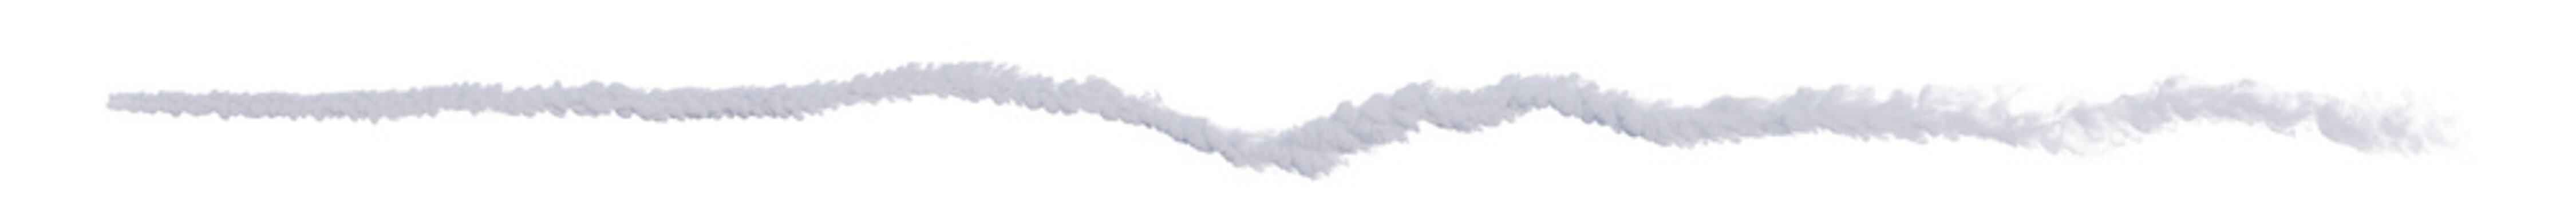 Line of cloud trail shape with isolated on transparent background - PNG file, 3D rendering illustration, Clip art, cut out and sky elements